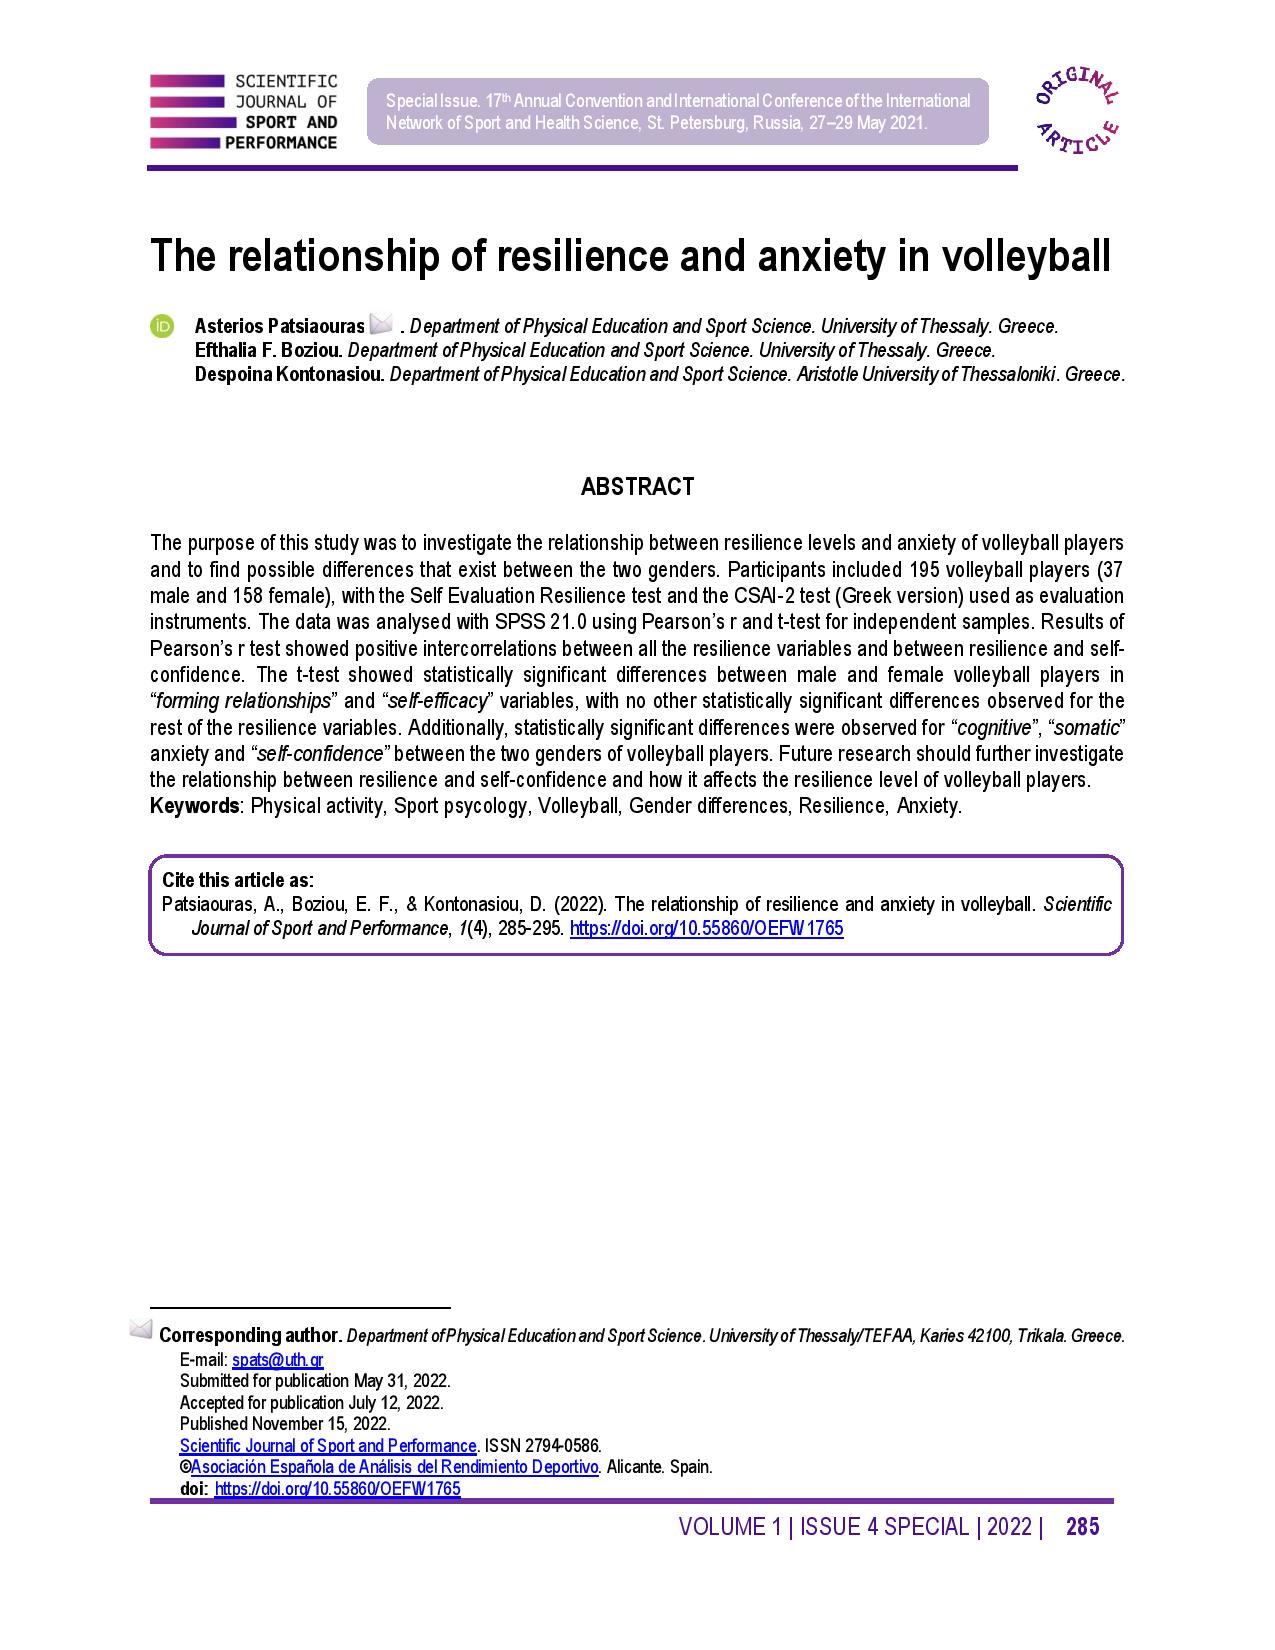 The relationship of resilience and anxiety in volleyball